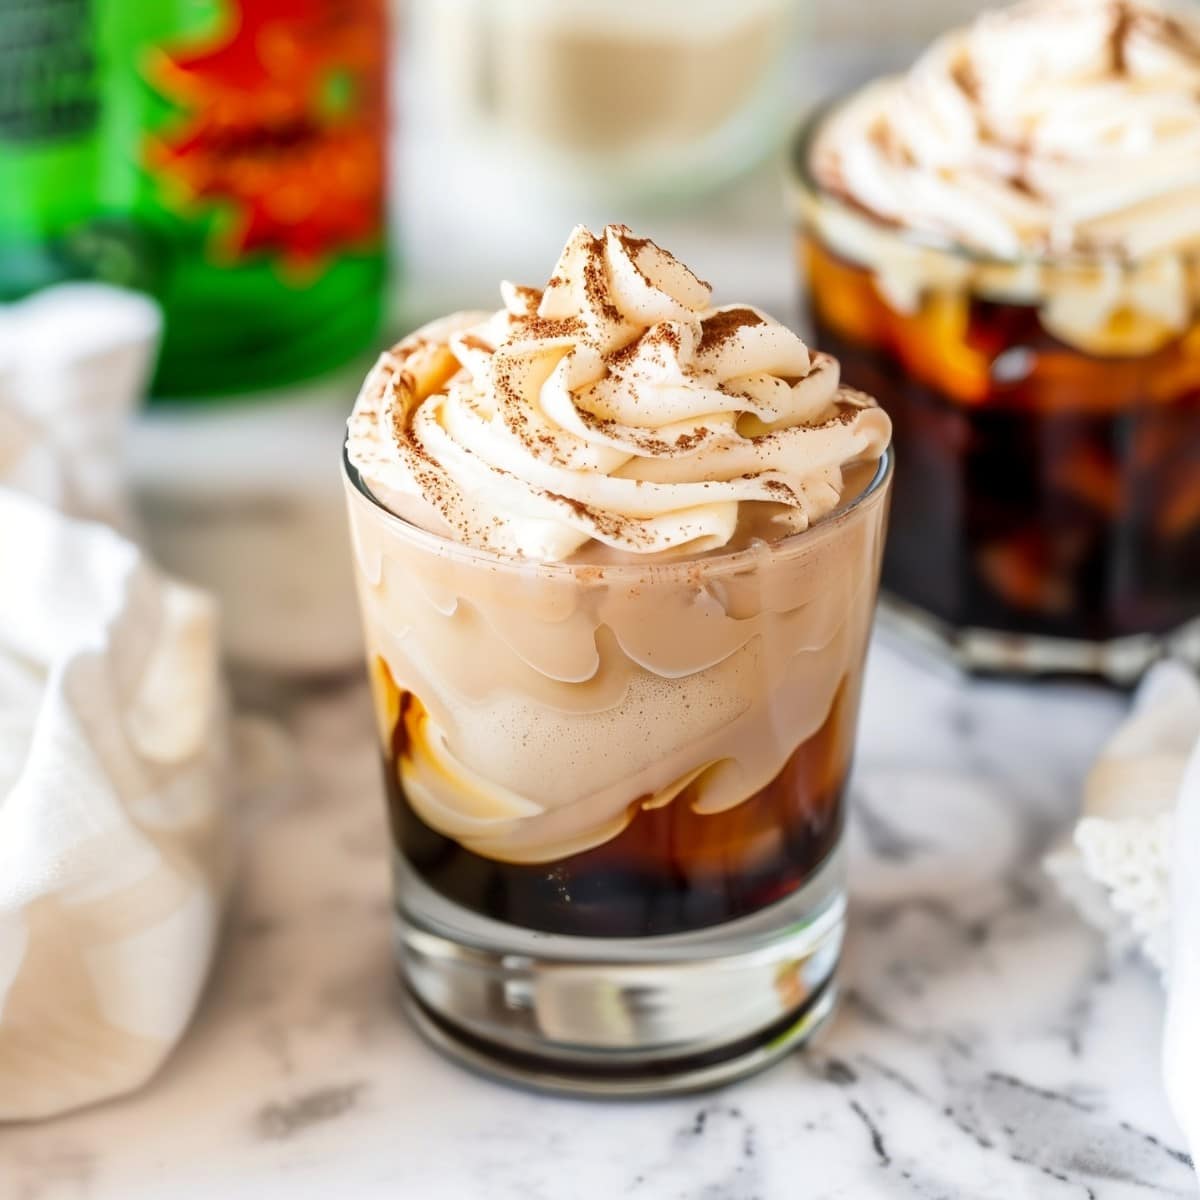 A shot glass of coffee liqueur topped with Kahlua whipped cream